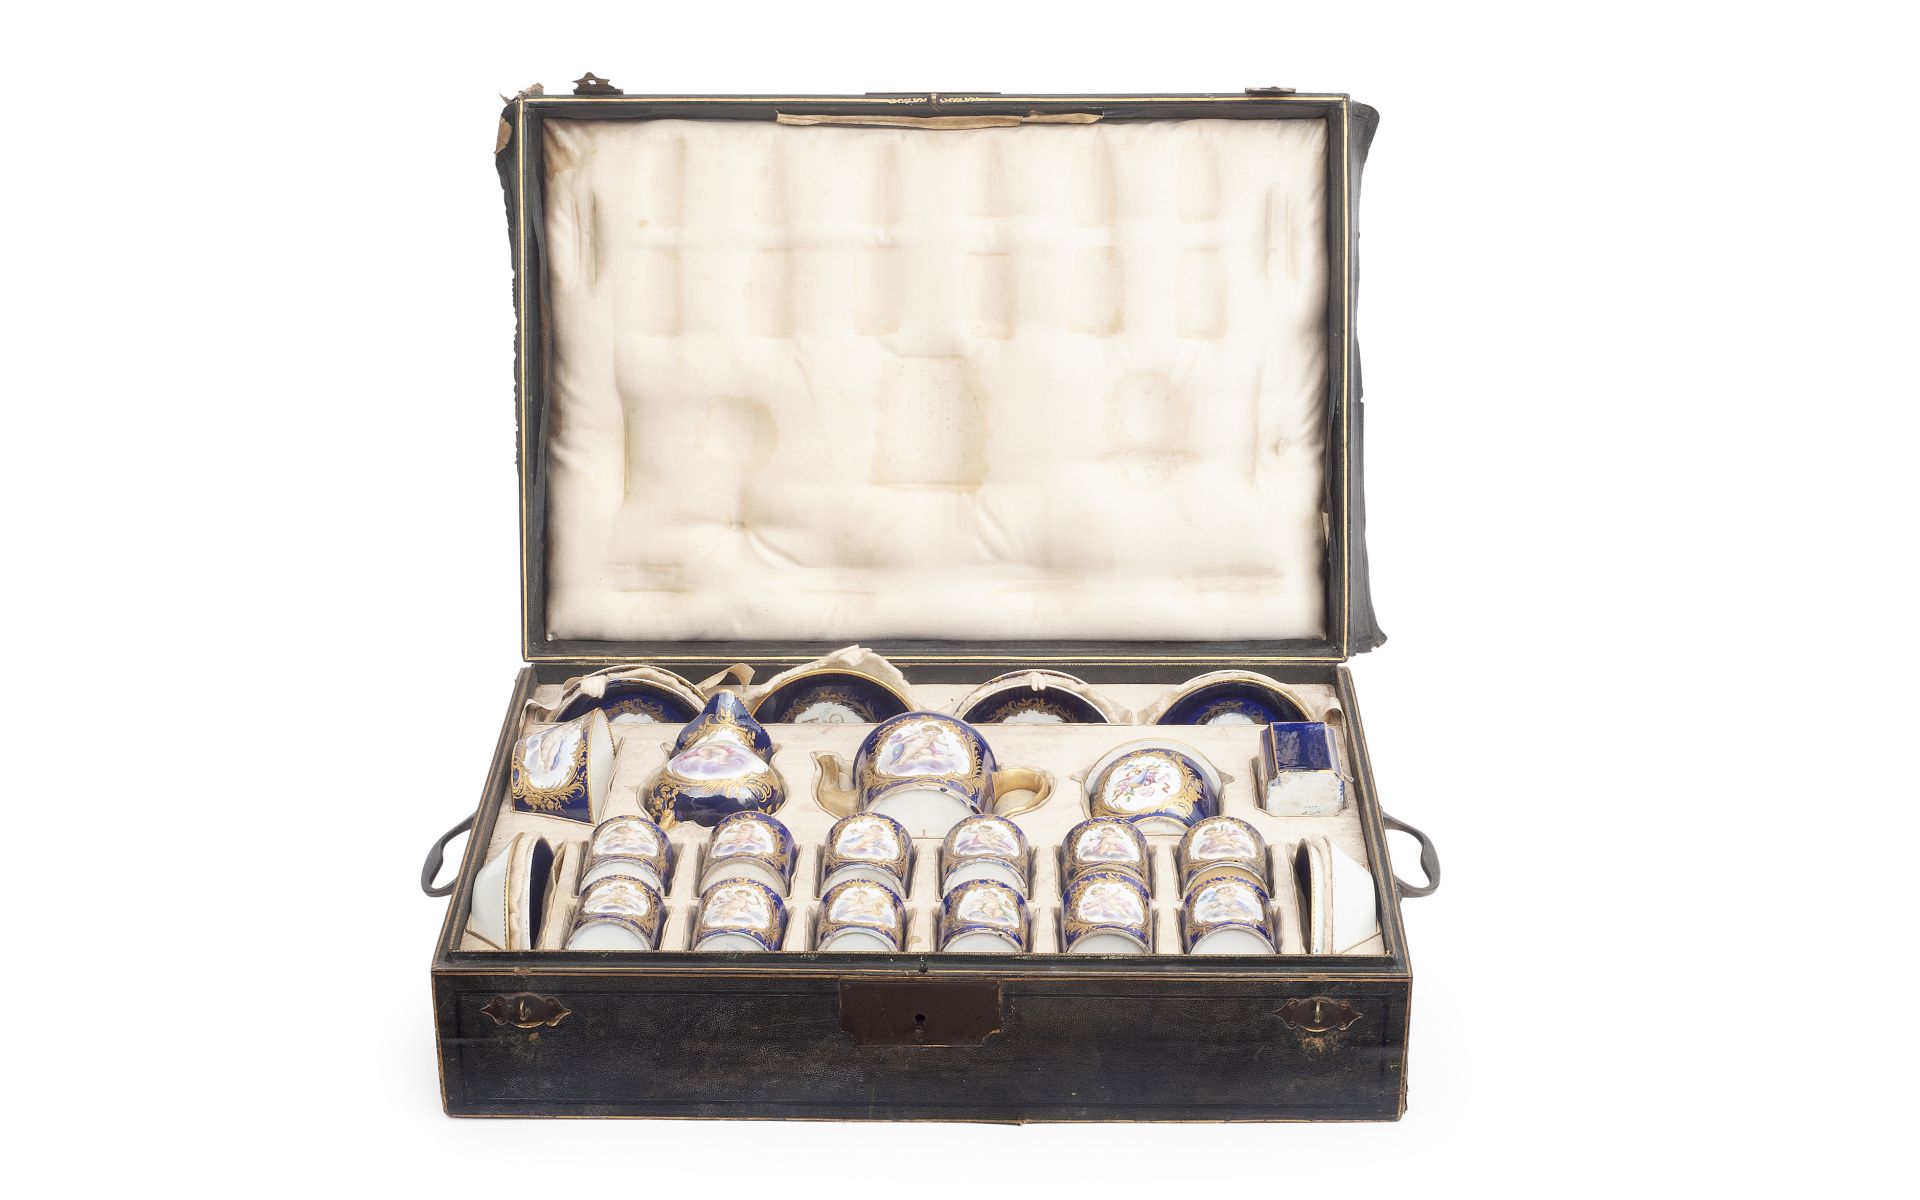 A RARE MID 19TH CENTURY SEVRES STYLE PORCELAIN TRAVELLING TEA SERVICE